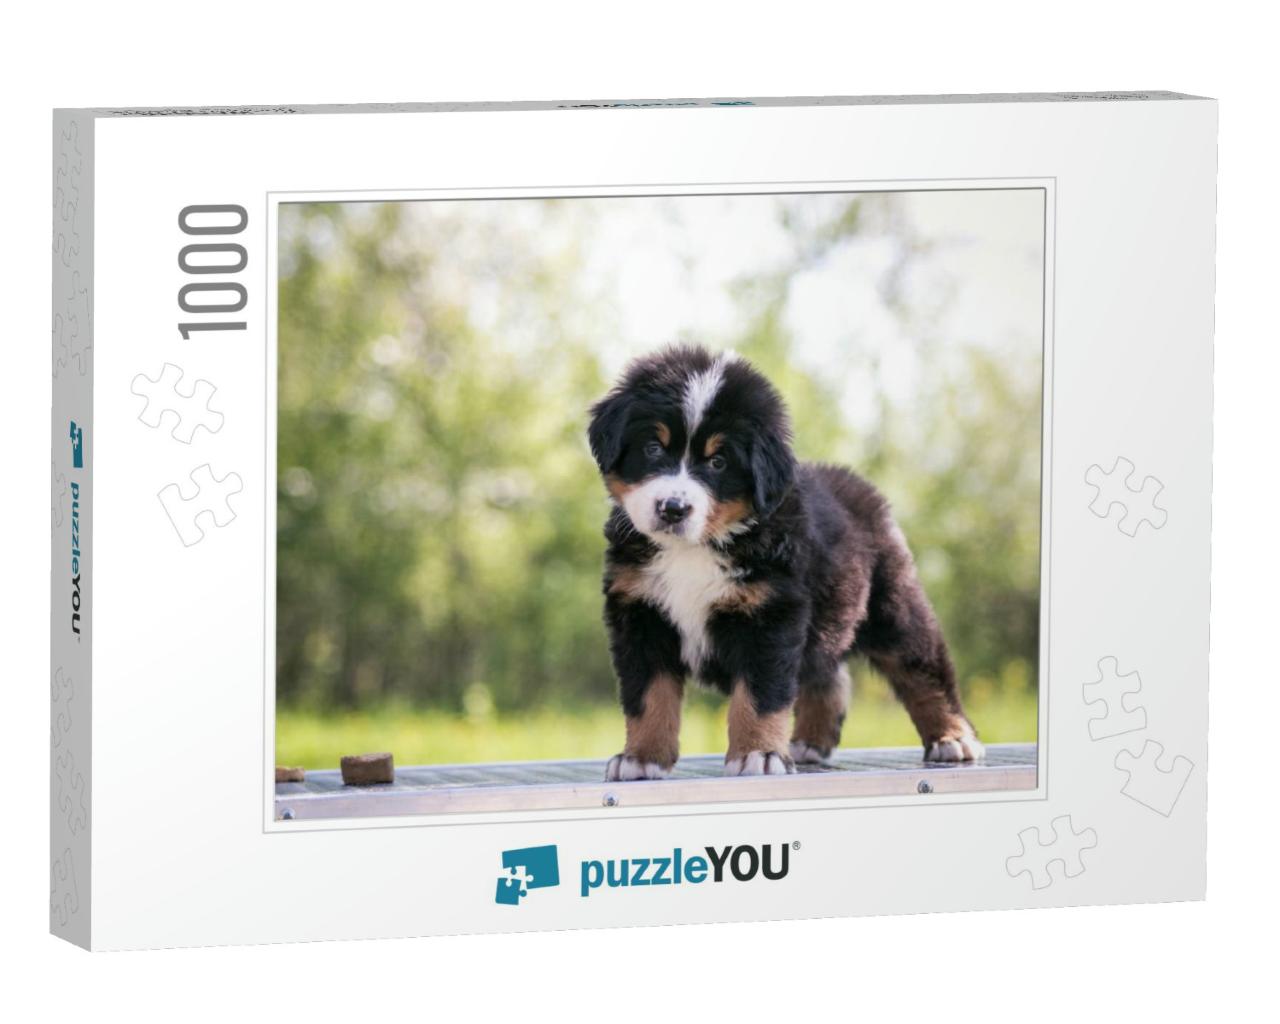 Bernese Mountain Dog Puppy Outside. So Cute & Small Berne... Jigsaw Puzzle with 1000 pieces